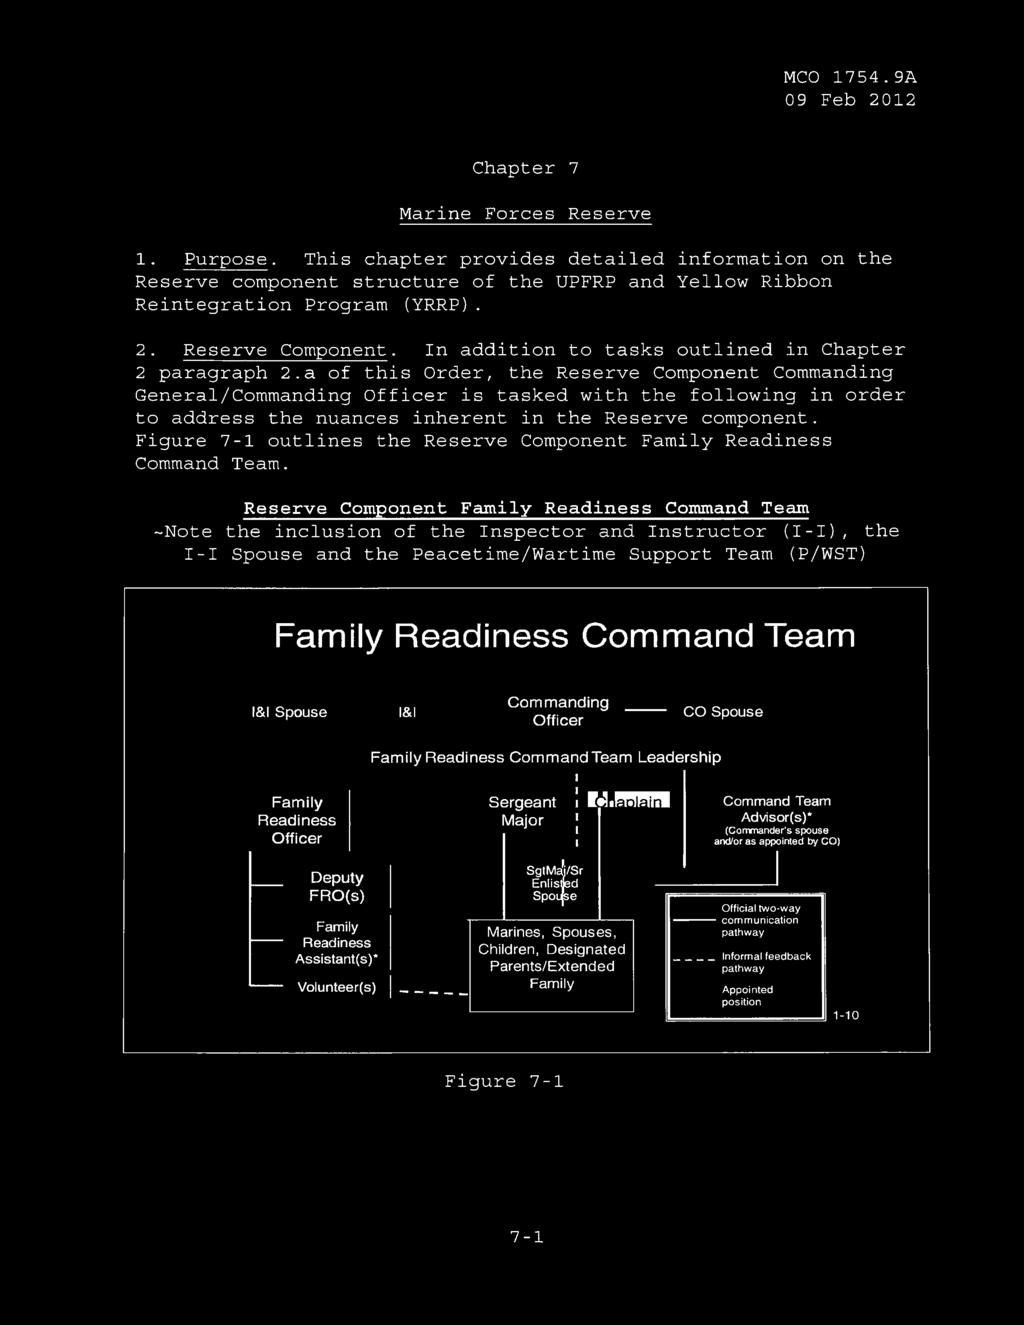 Reserve Component Family Readiness Command Team -Note the inclusion of the Inspector and Instructor (I-I), the I-I Spouse and the Peacetime/Wartime Support Team (P/WST) F a m i l y R e a d i n e s s